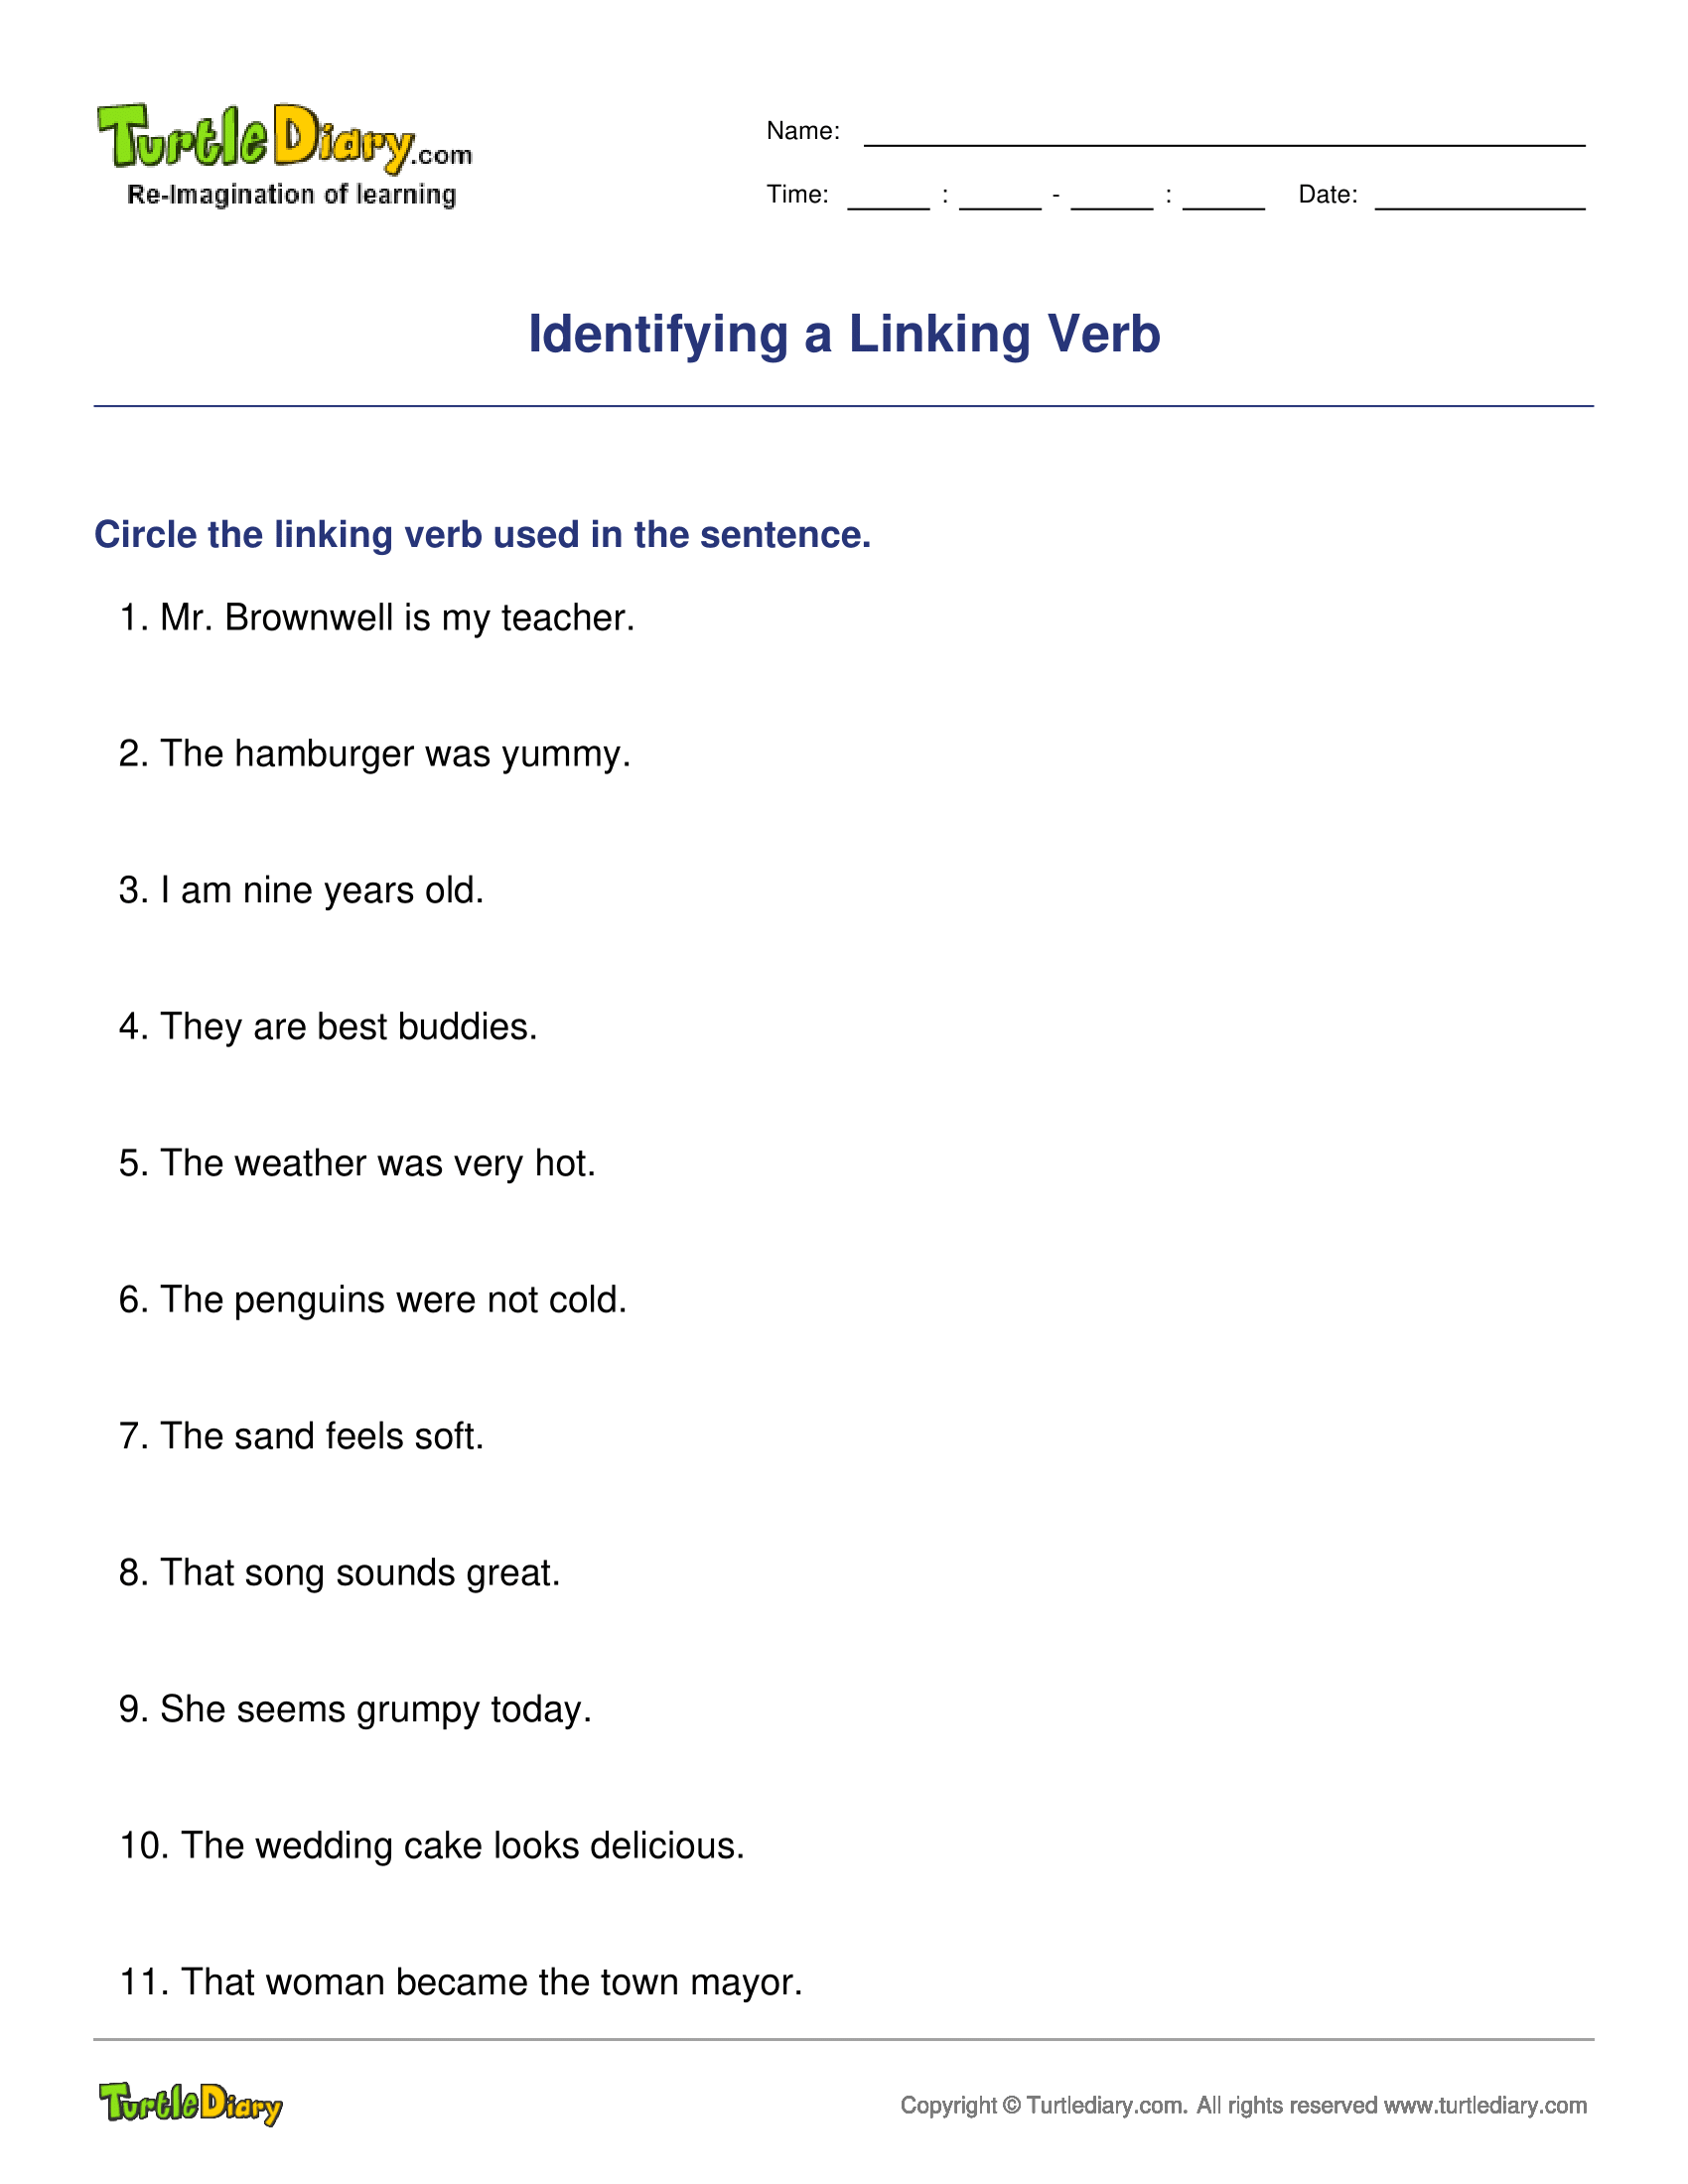 Identifying a Linking Verb